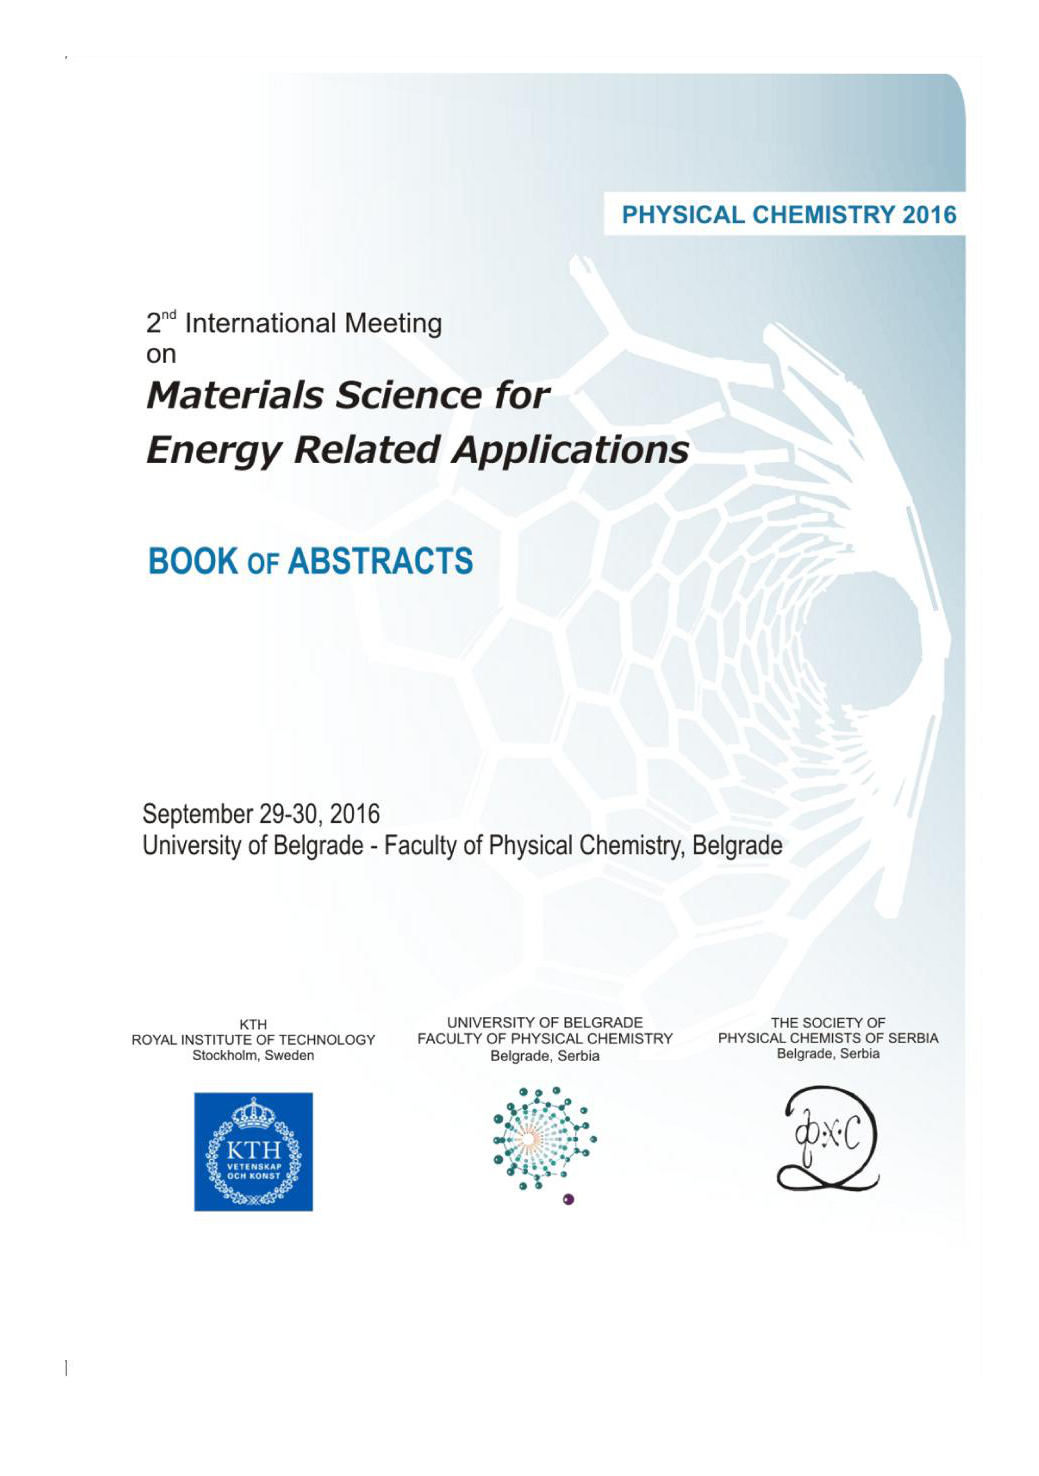 Materials 2016 - Book of Abstracts